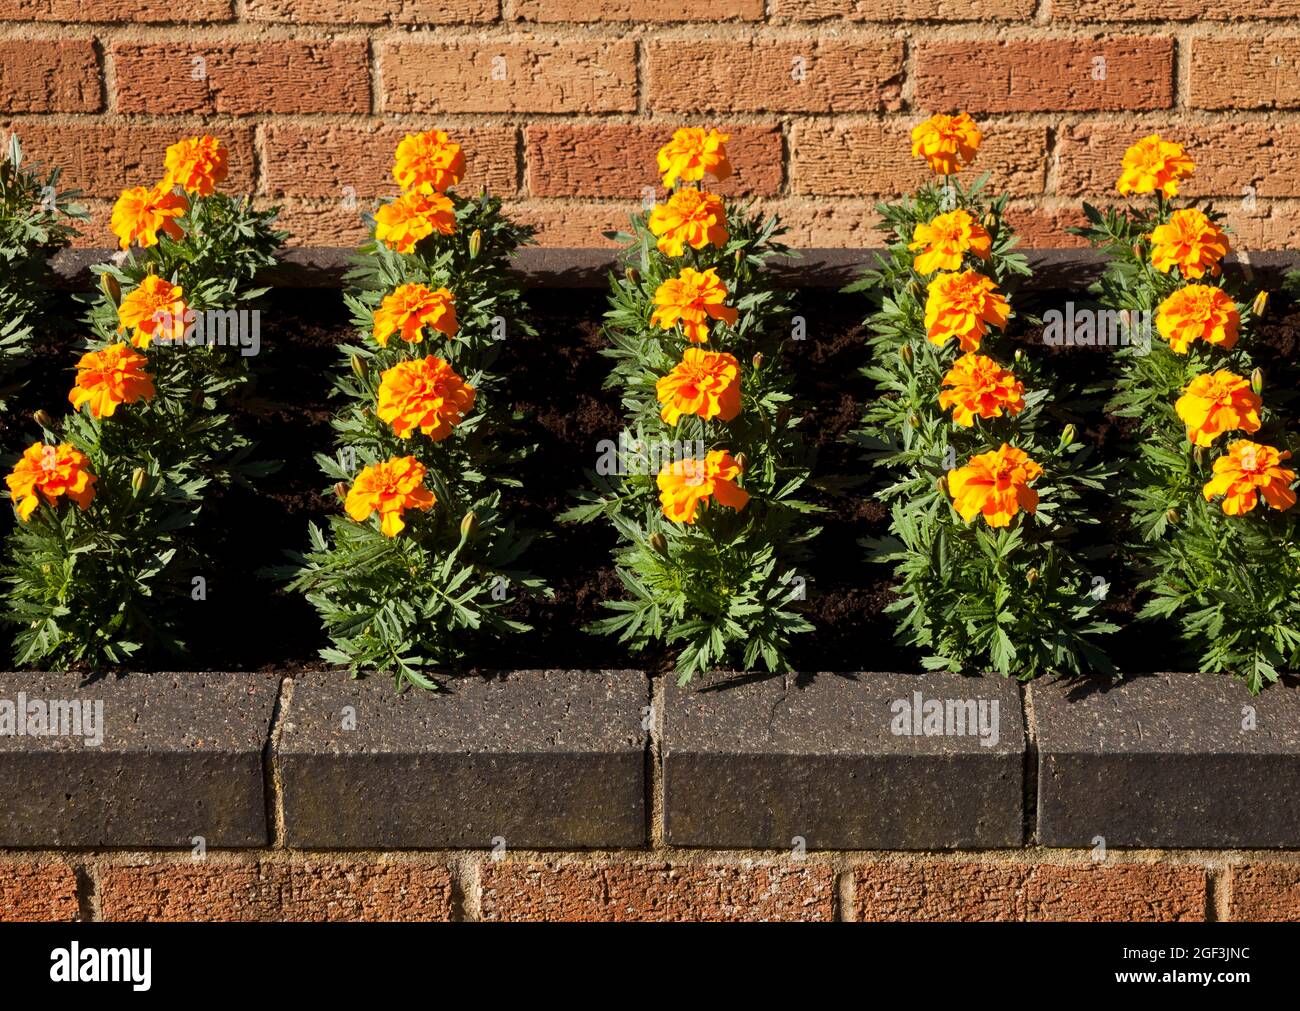 Raised Flower Bed on a Patio Stock Photo